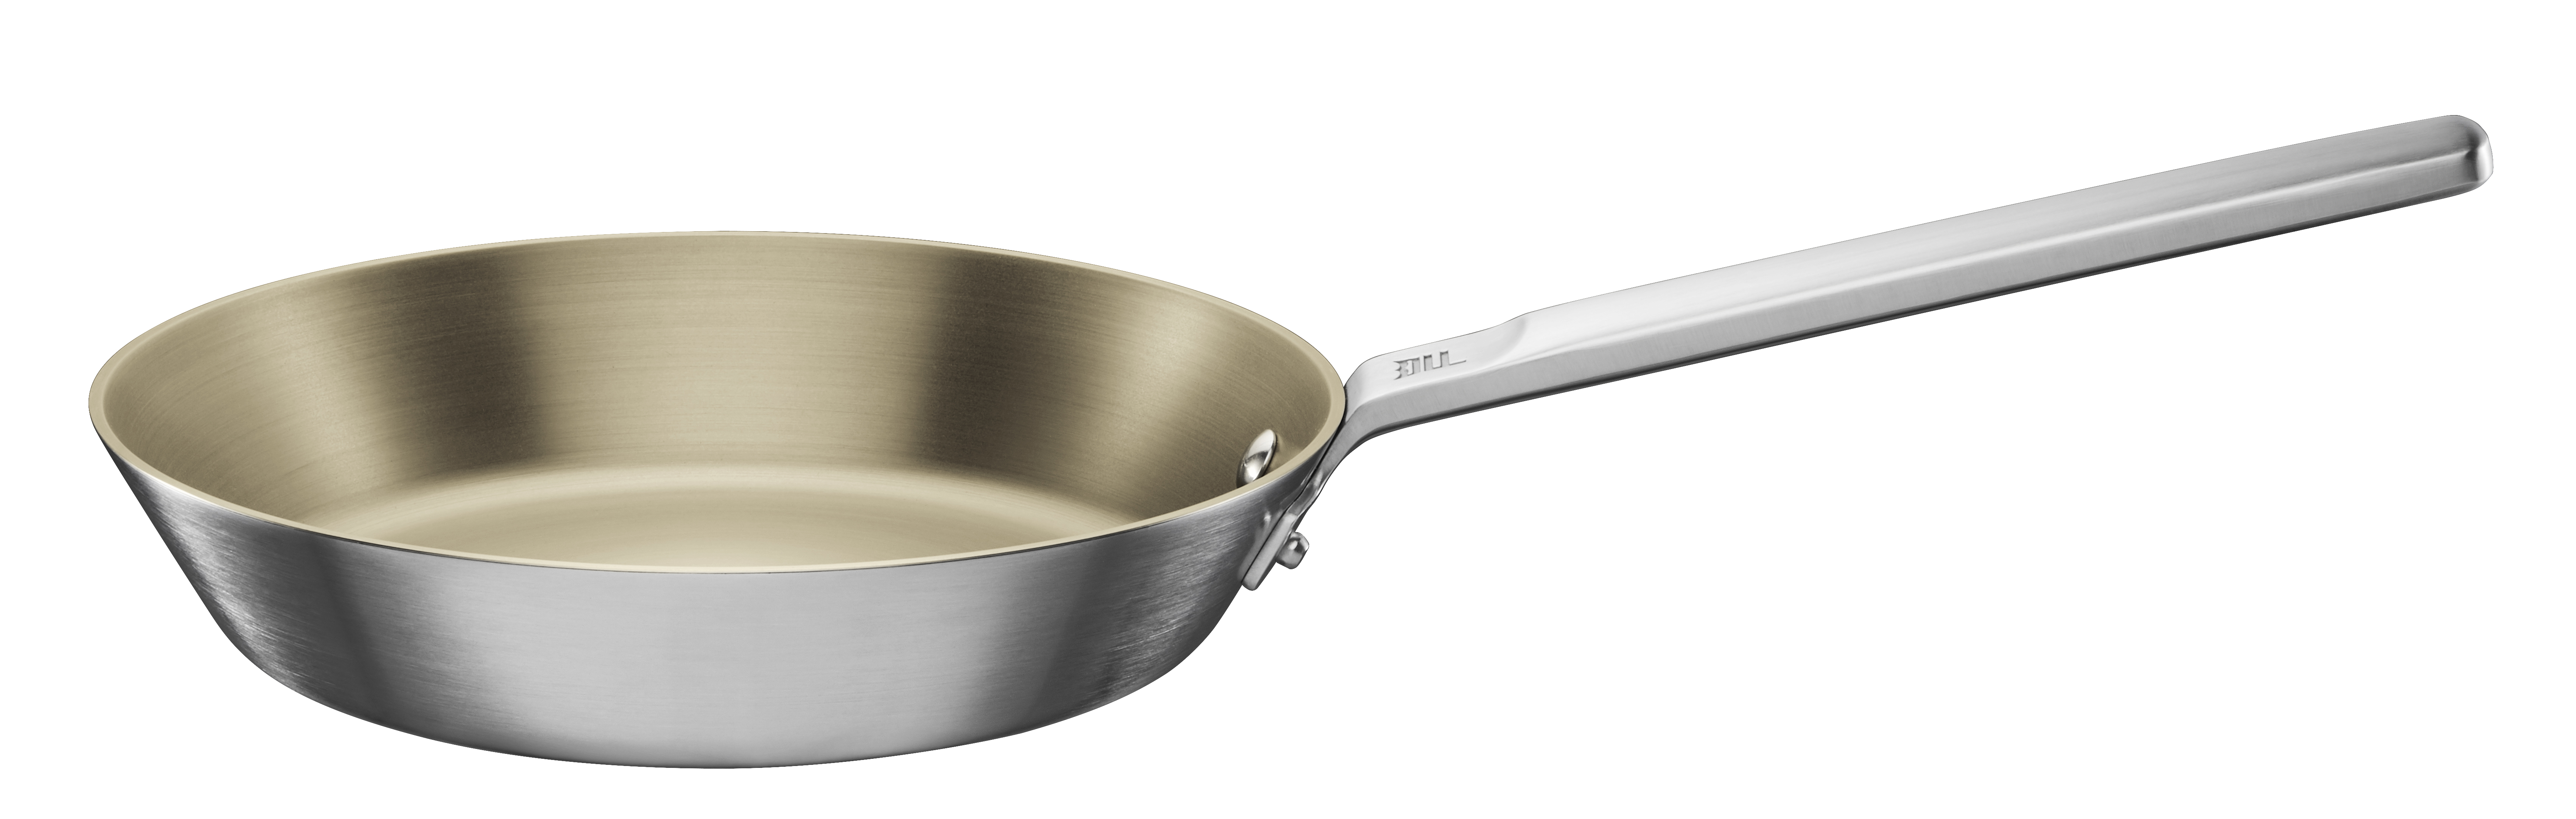 Stainless steel collection Stainless Steel Sauce Pan 24 cm